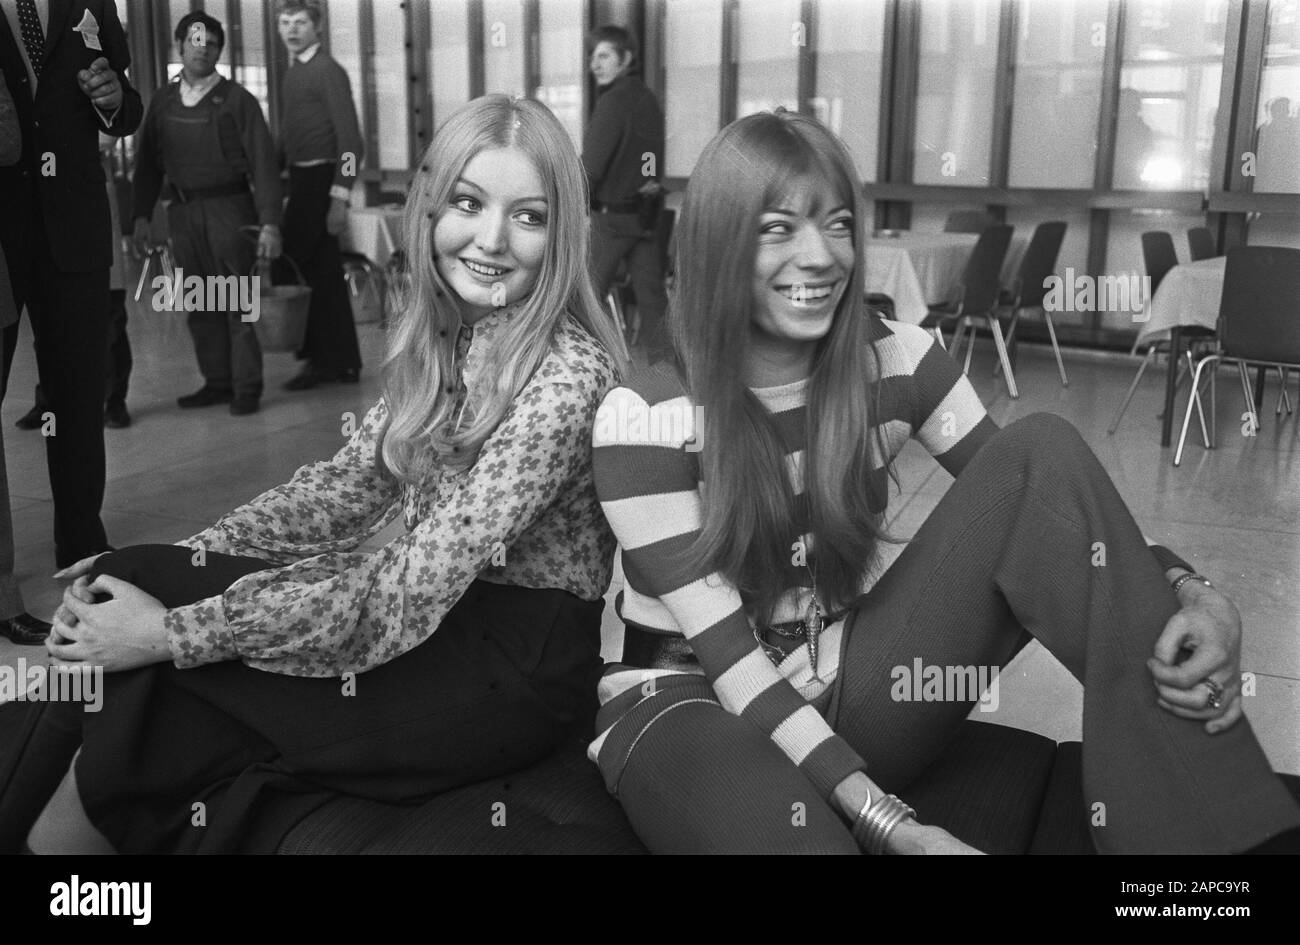 Eurovision Song Contest 1970 in RAI Amsterdam Description: Arrival artists at Schiphol. Mary Hopkin (England) and Katja Ebstein (Germany) Date: 19 March 1970 Location: Schiphol Keywords: artists, song festivals, singers Personal name: Ebstein, Katja, Hopkin, Mary Institution name: Eurovision Song Festival Stock Photo